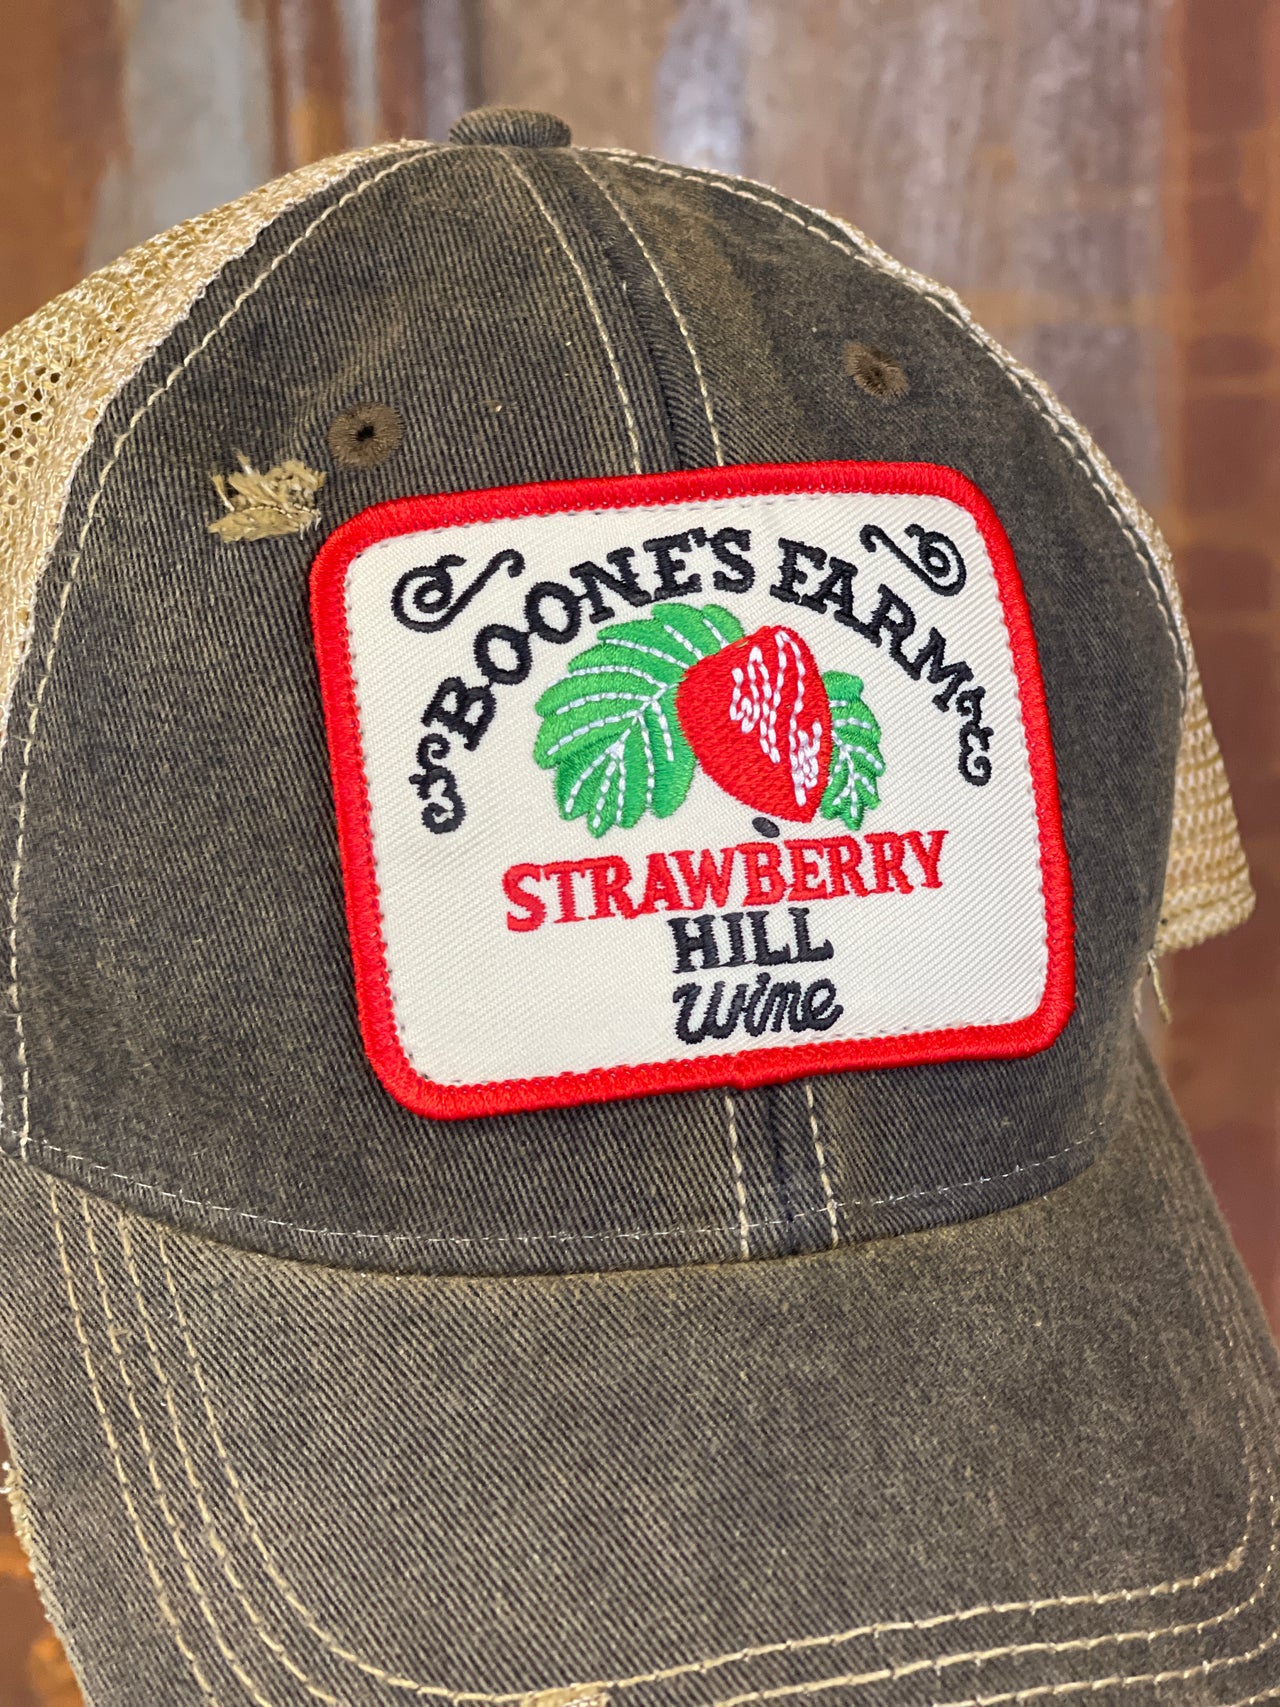 House party STRAWBERRY Version Hat -Distressed Black [PRE-ORDER]